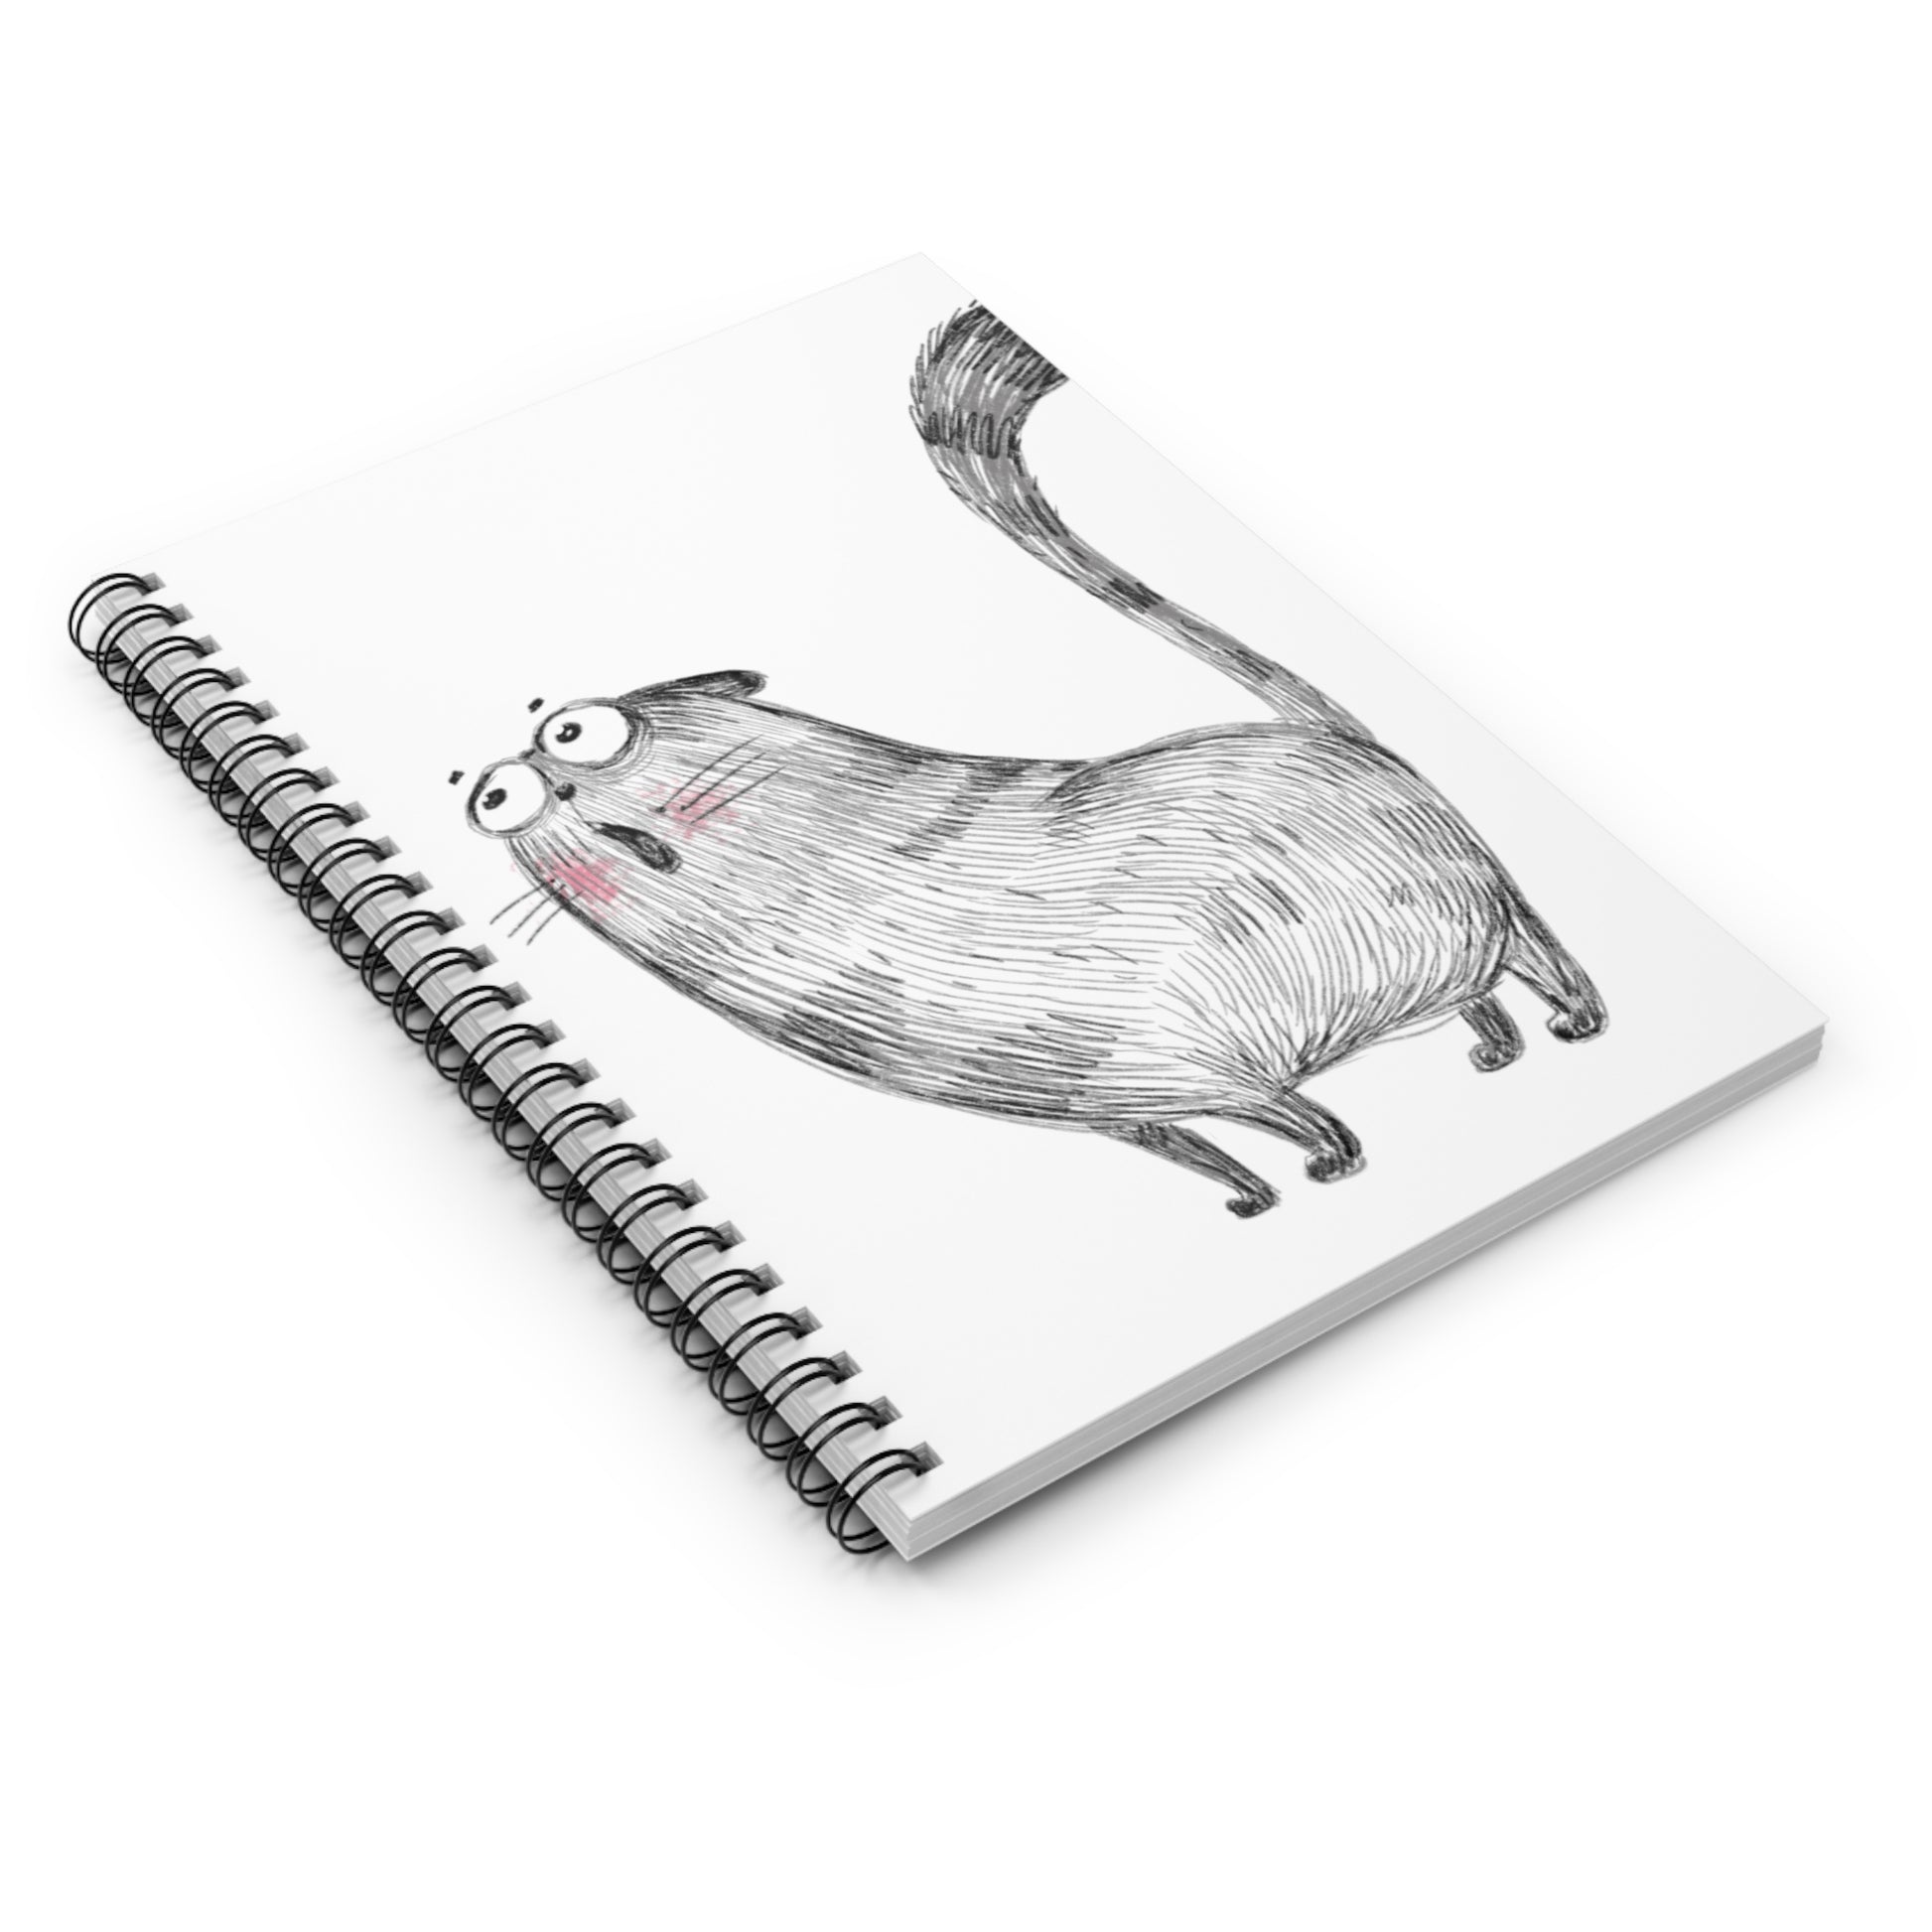 But I Don't Need to go to the Vet: Spiral Notebook - Log Books - Journals - Diaries - and More Custom Printed by TheGlassyLass